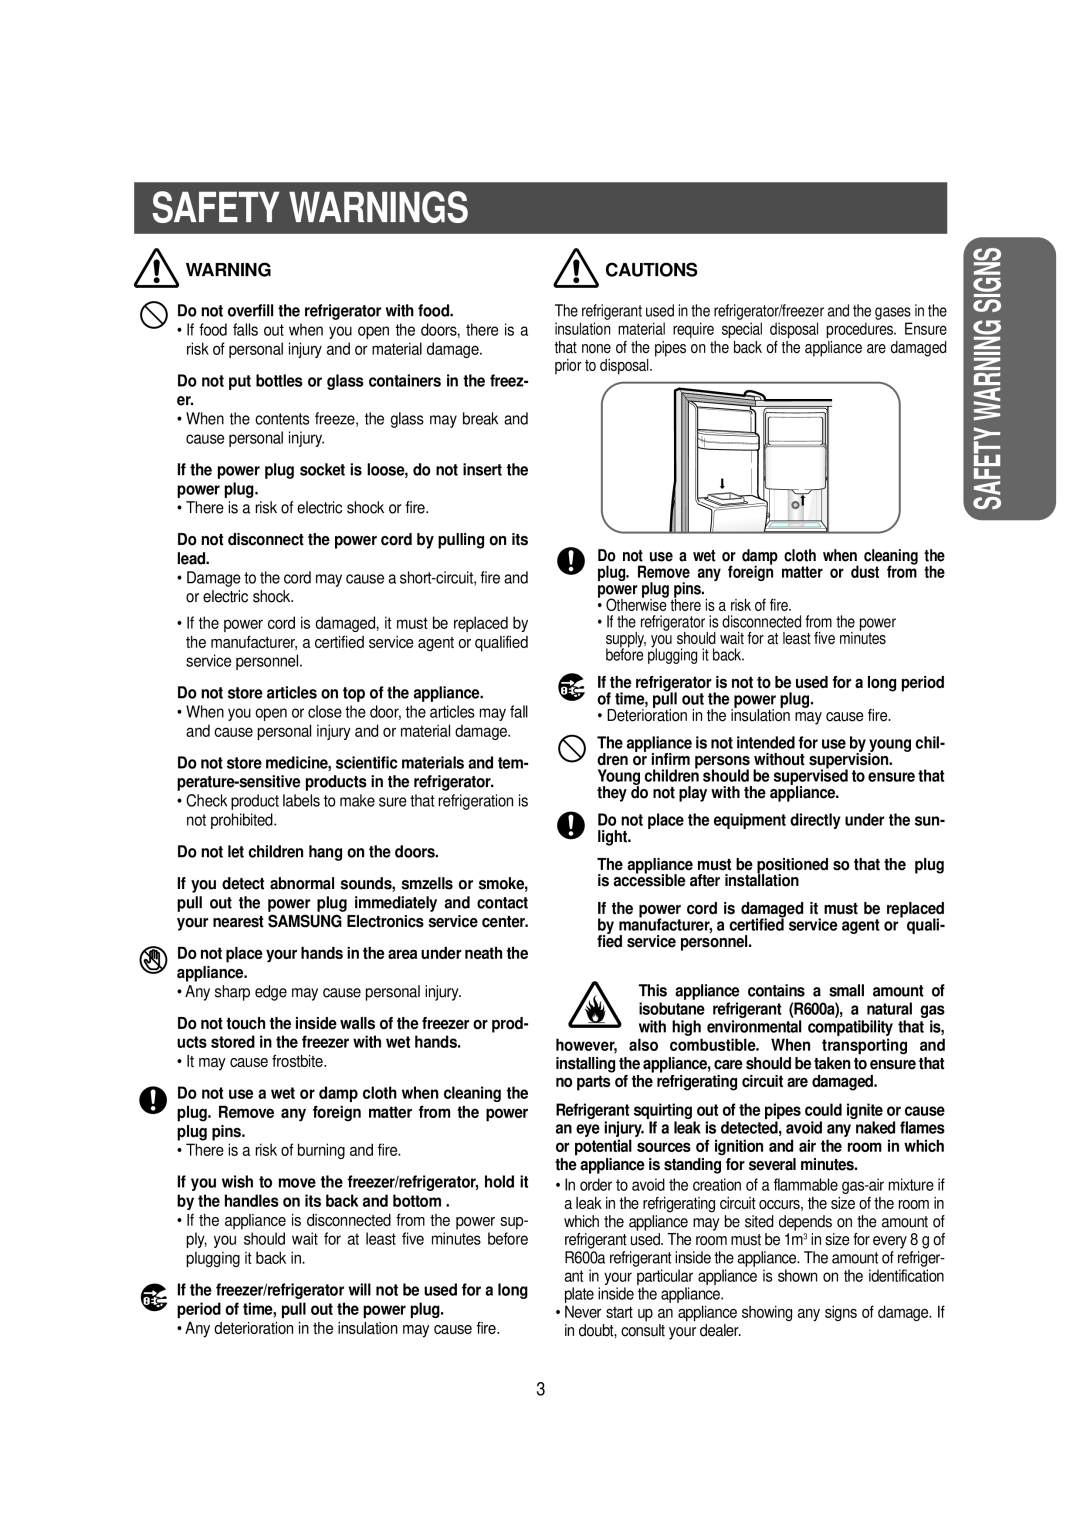 Samsung RS20 owner manual Safety Warning Signs, Cautions, Safety Warnings 